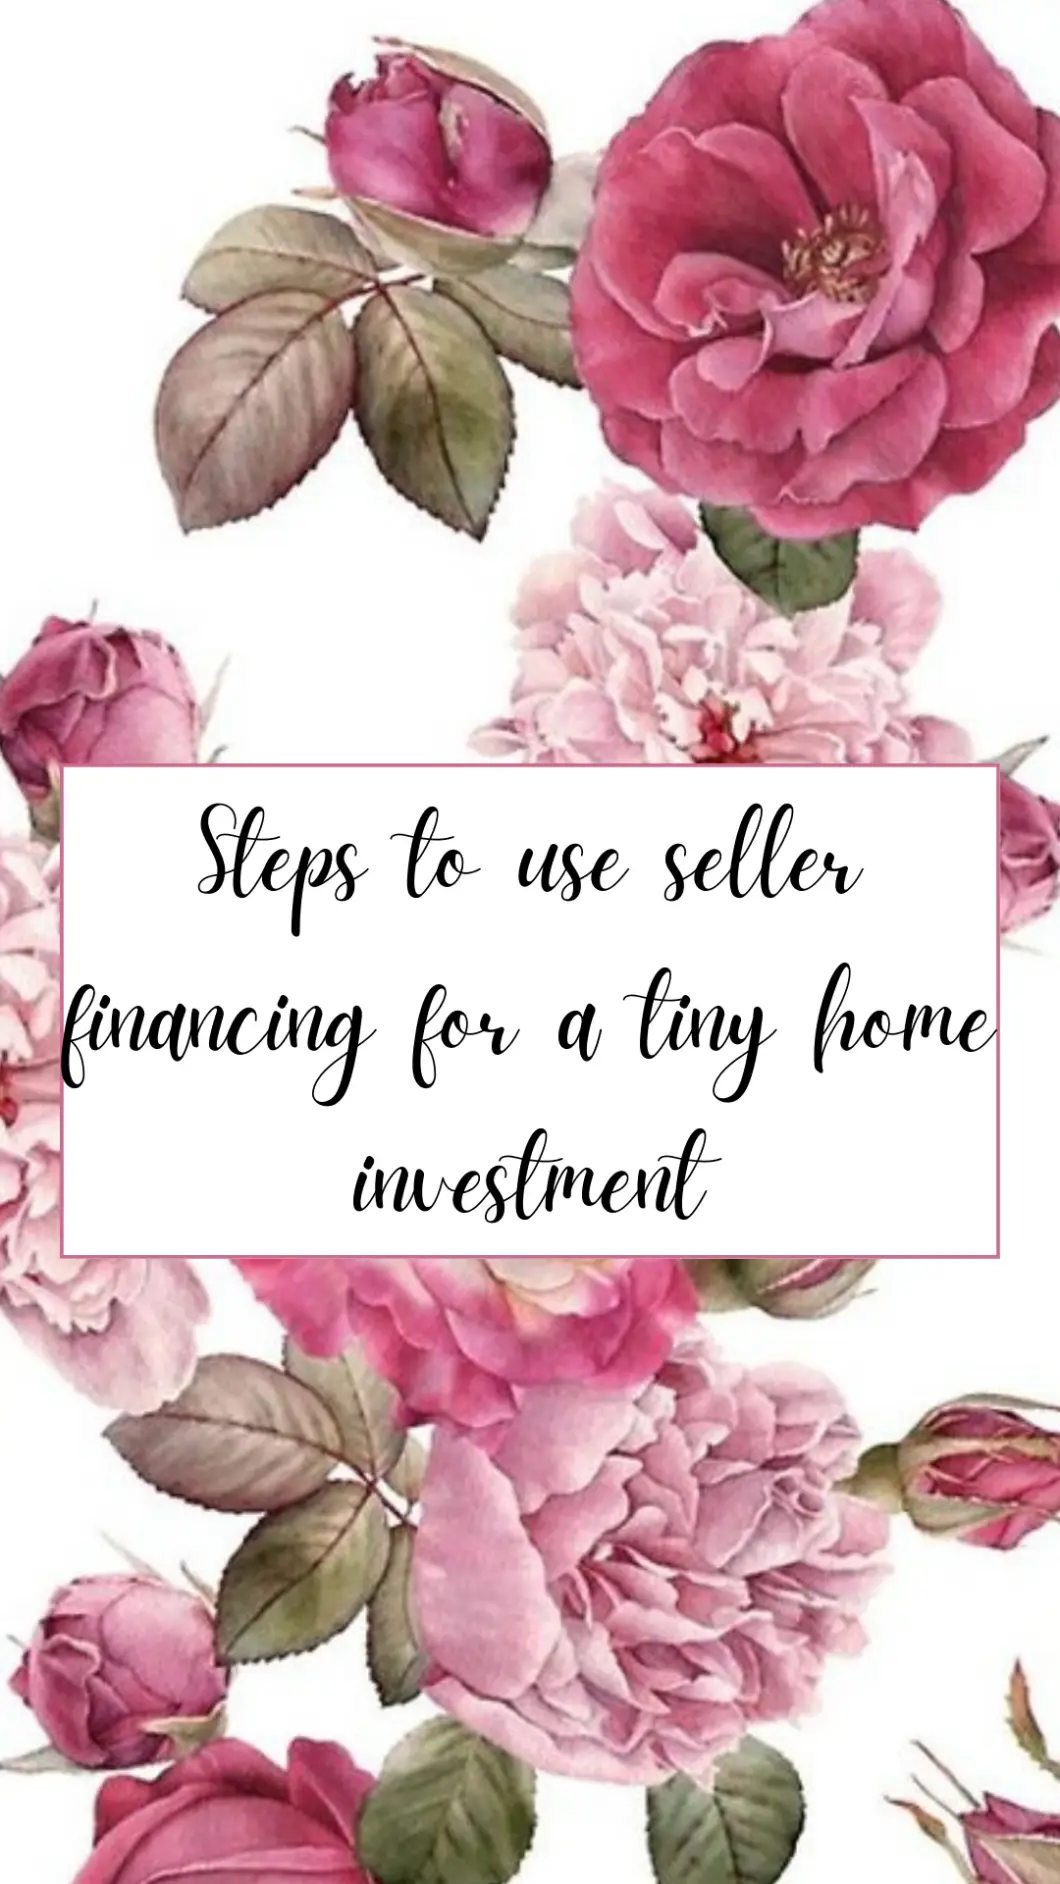 Steps to use seller financing for a tiny home investment